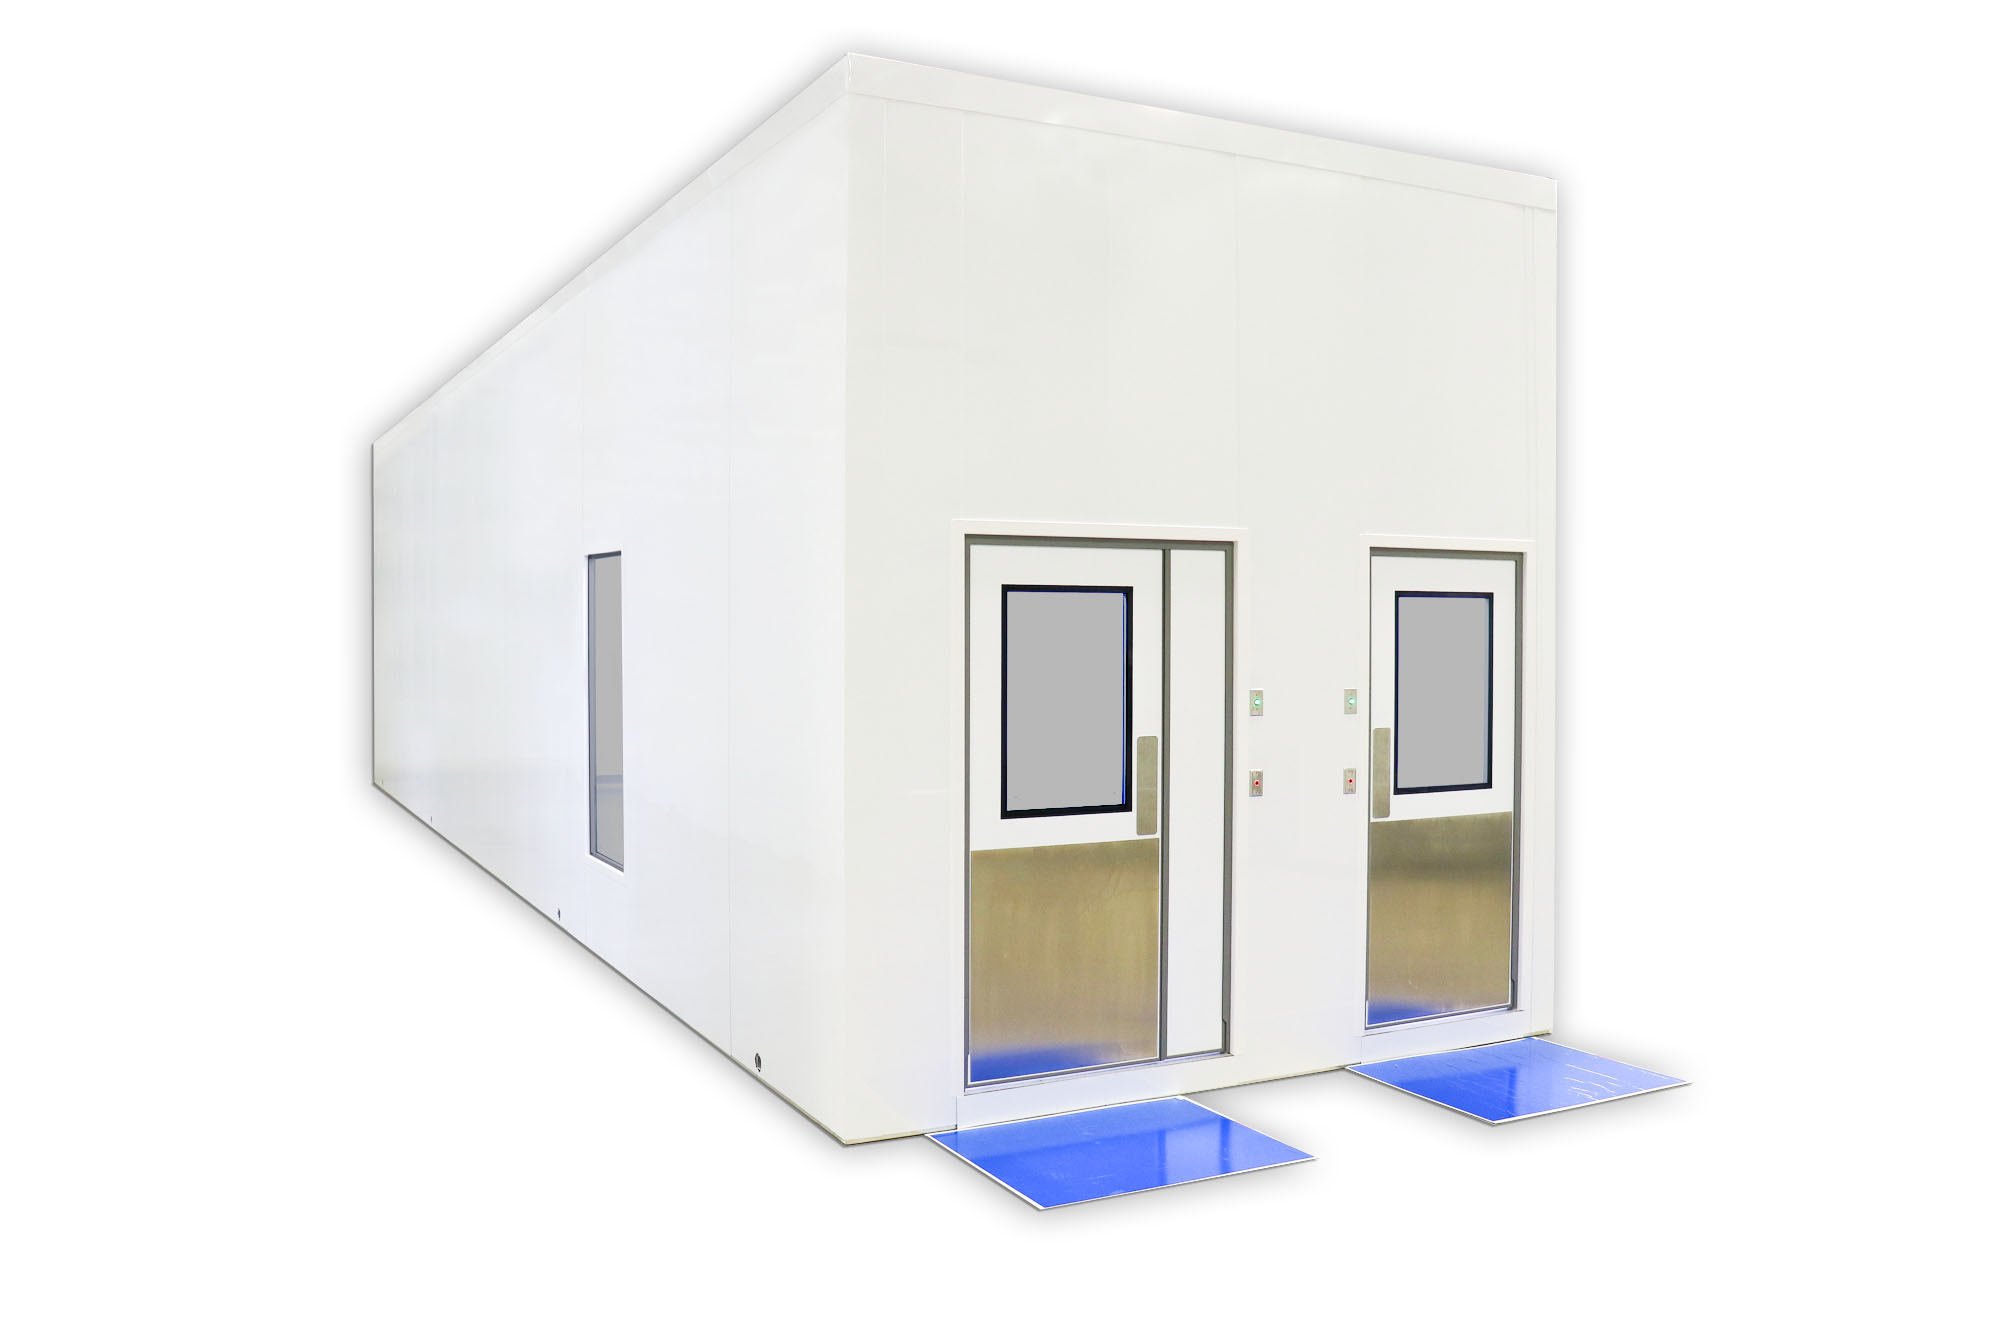 G-CON Cleanroom PODs